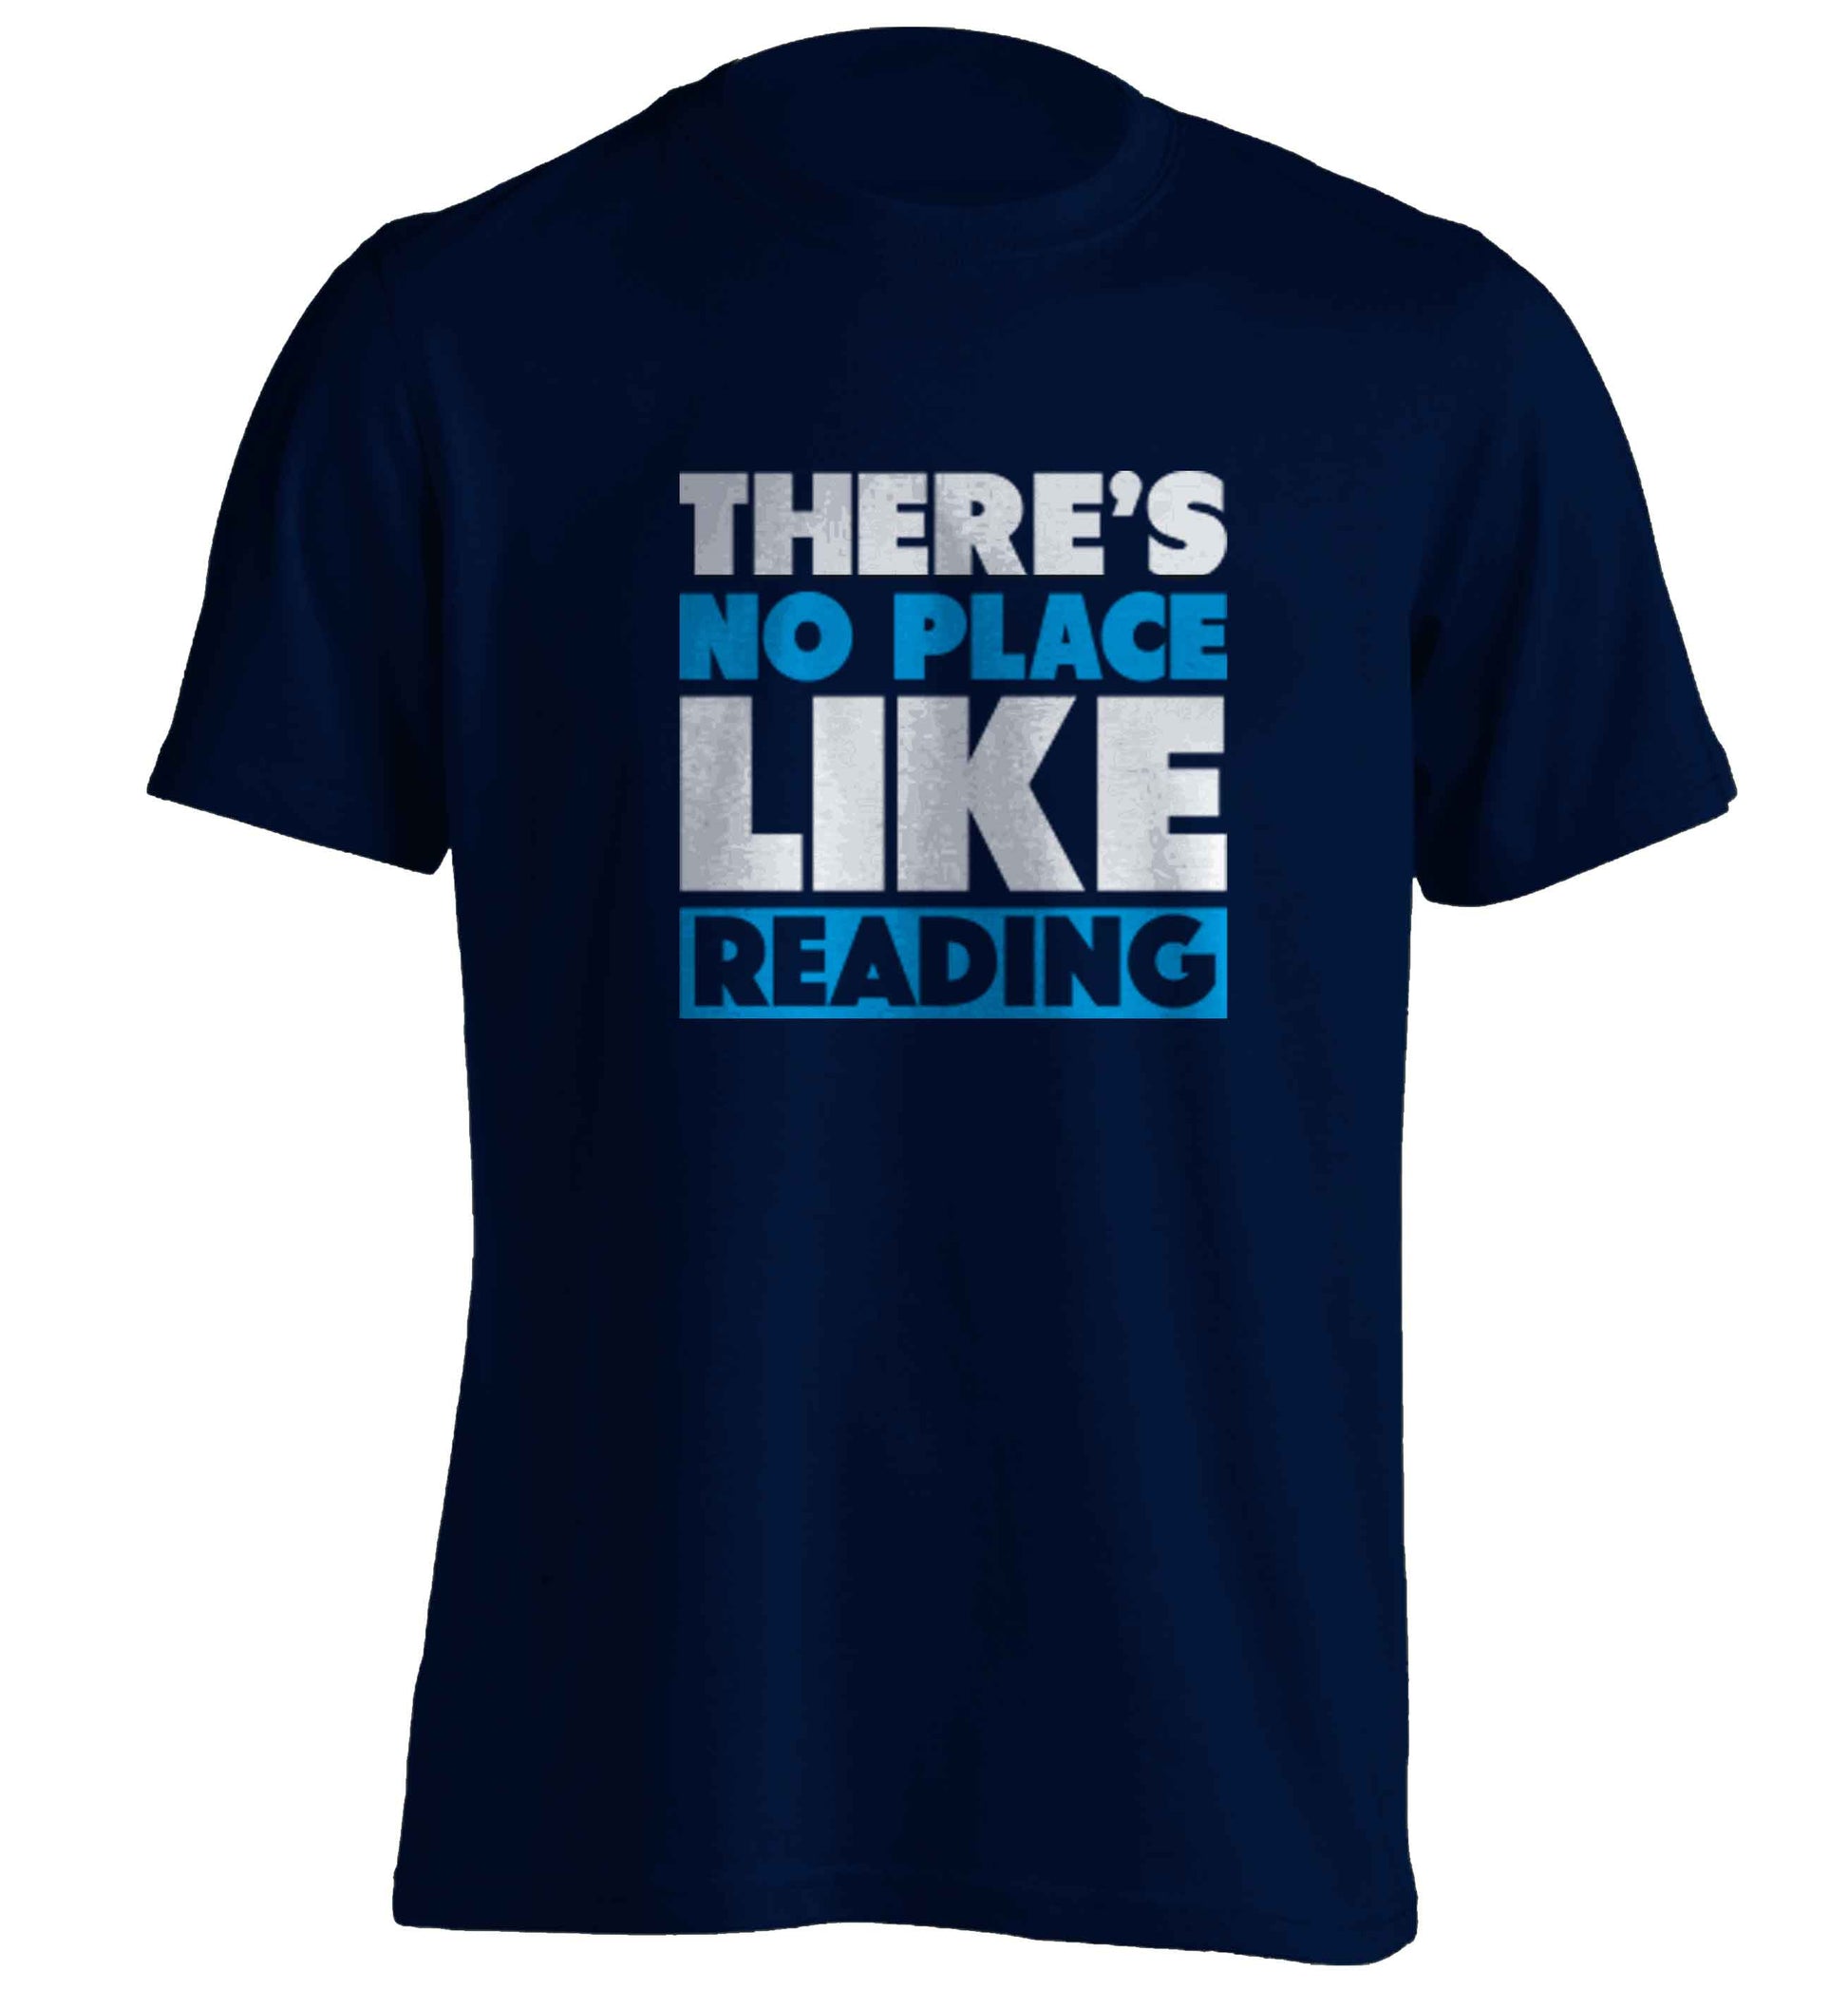 There's no place like Readingadults unisex navy Tshirt 2XL